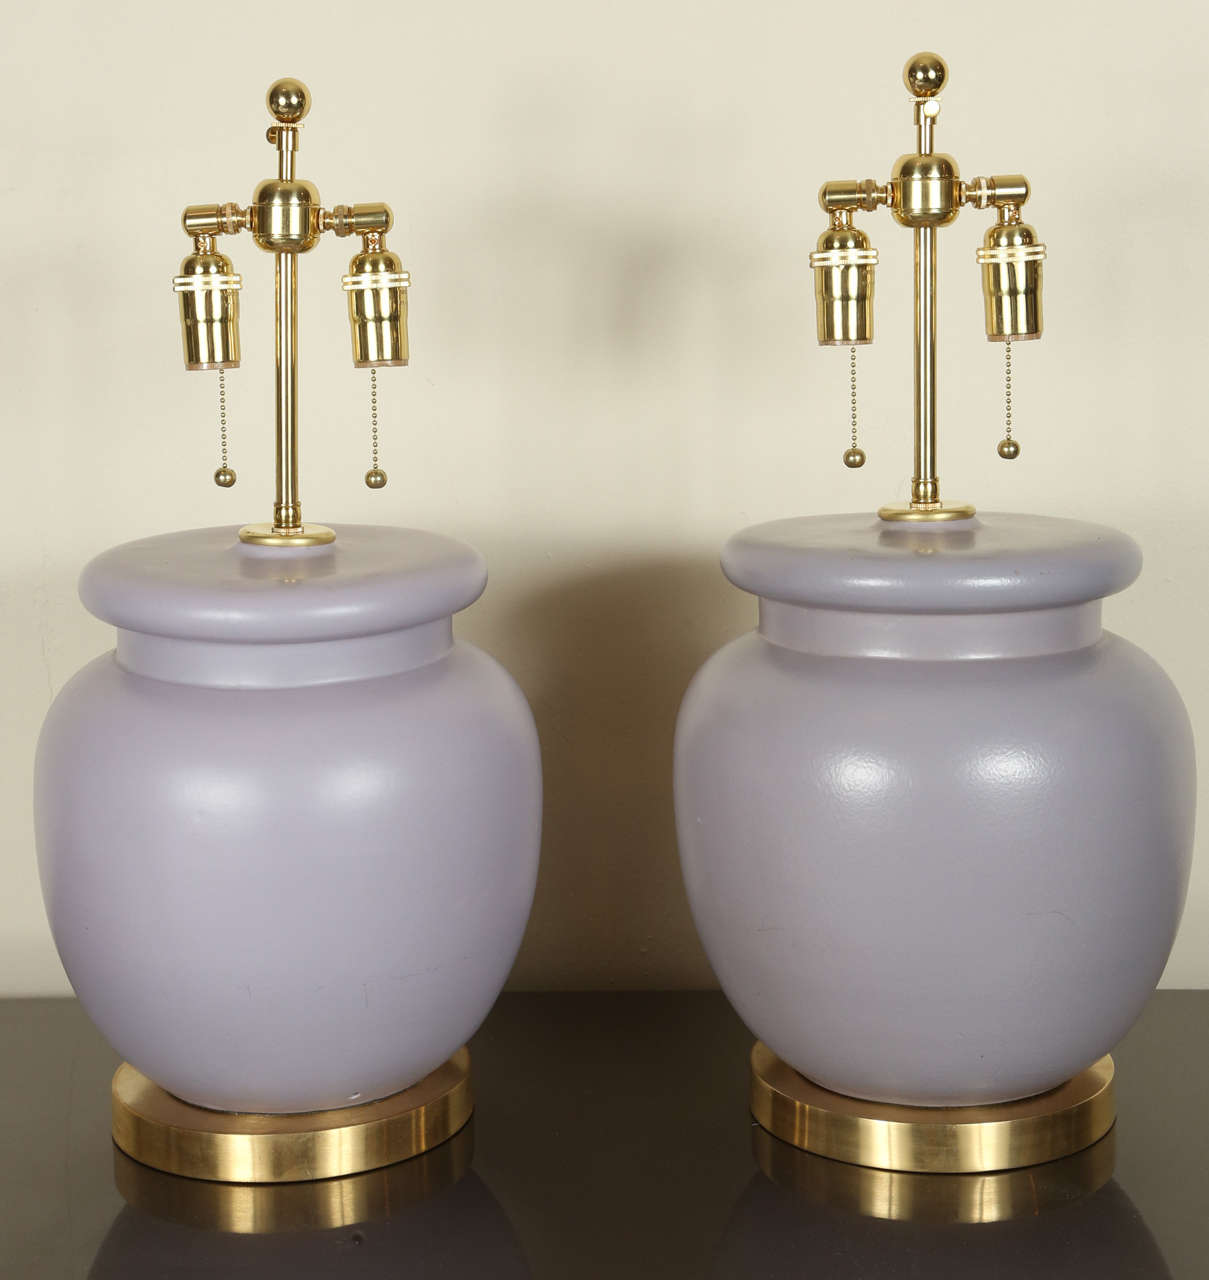 Pair of urn shaped table lamps with a lavender glazed finish.
The lamps are mounted on brass bases and they have been newly rewired with brass double clusters.